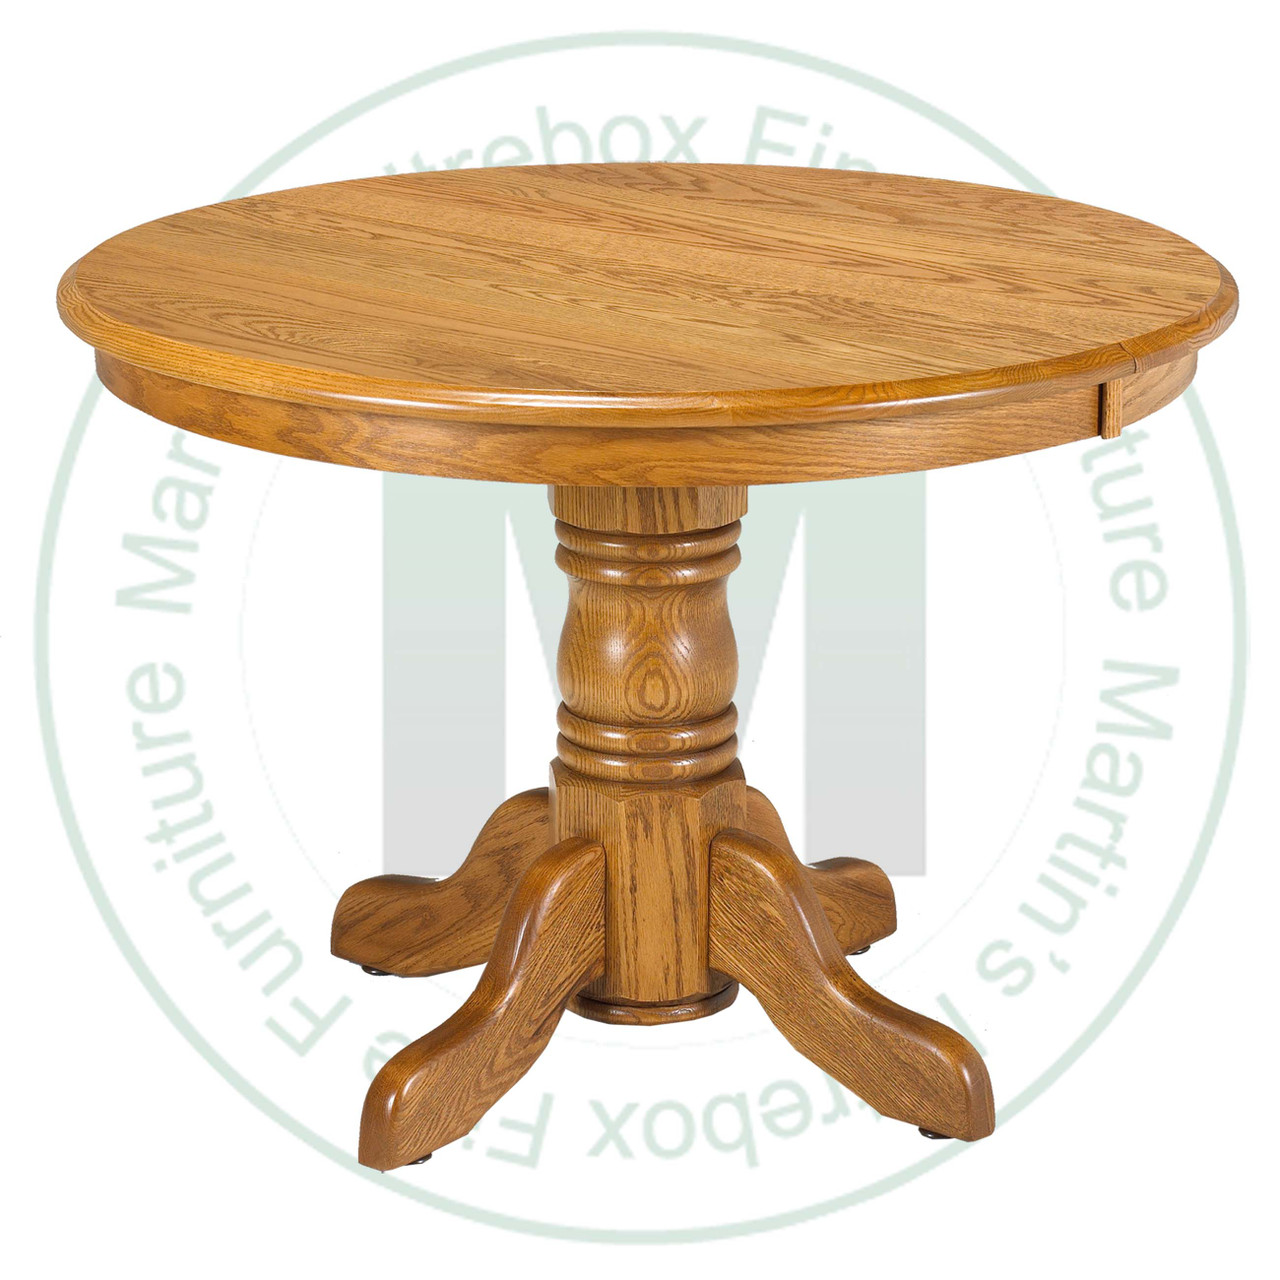 Wormy Maple Lancaster Collection Single Pedestal Table 48''D x 54''W x 30''H  Round Solid Table. Table Has 1.25'' Thick Top